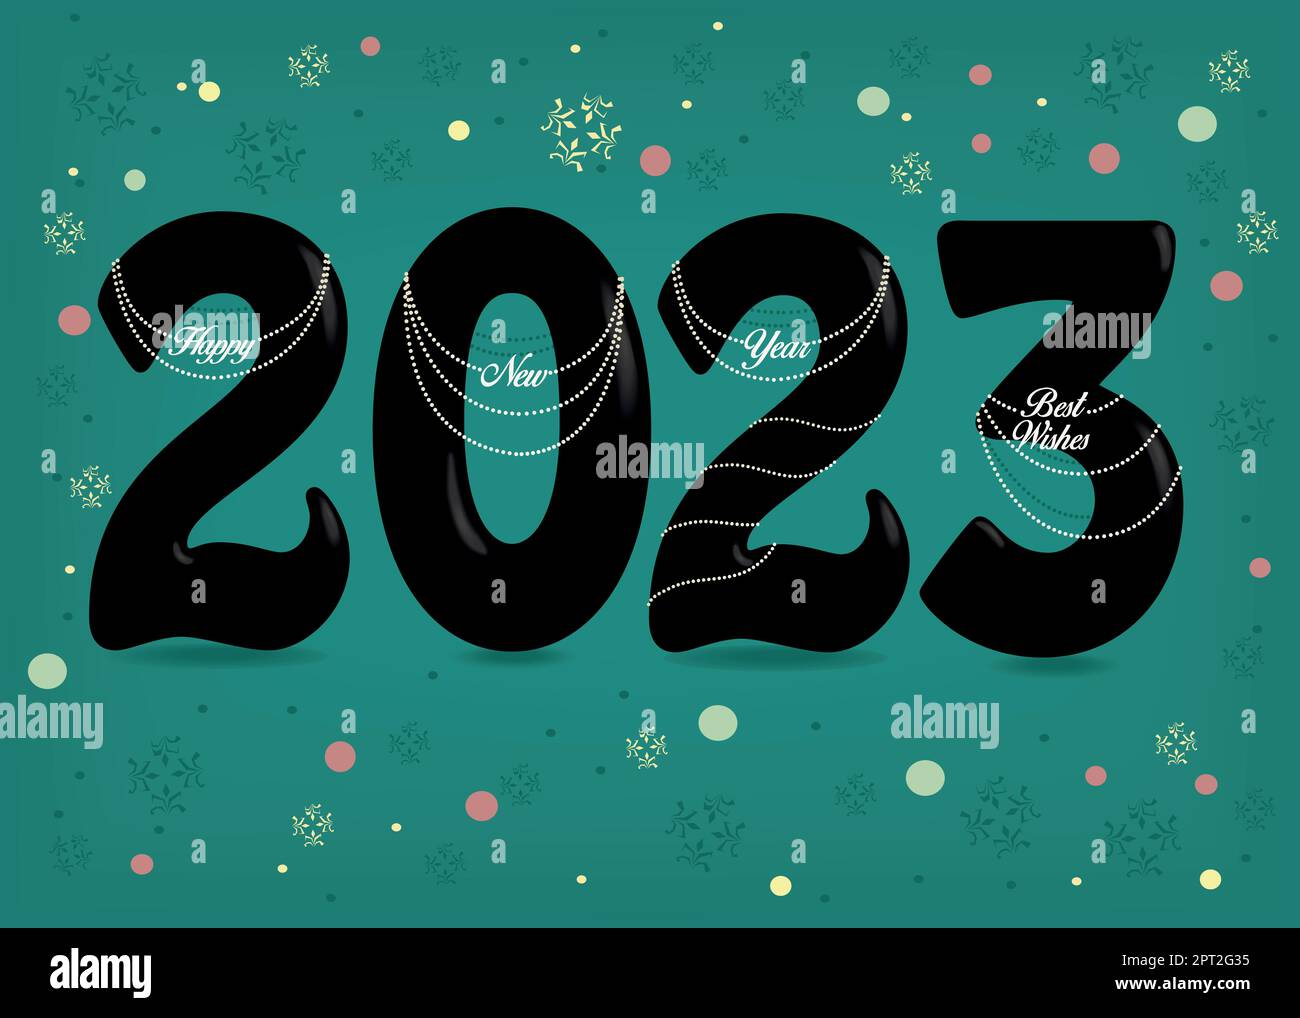 Black number 2023 with white pearl collars and texts as pendants - Happy New Year Best Wishes. Green background with colorful confetti. Vector illustration Stock Vector